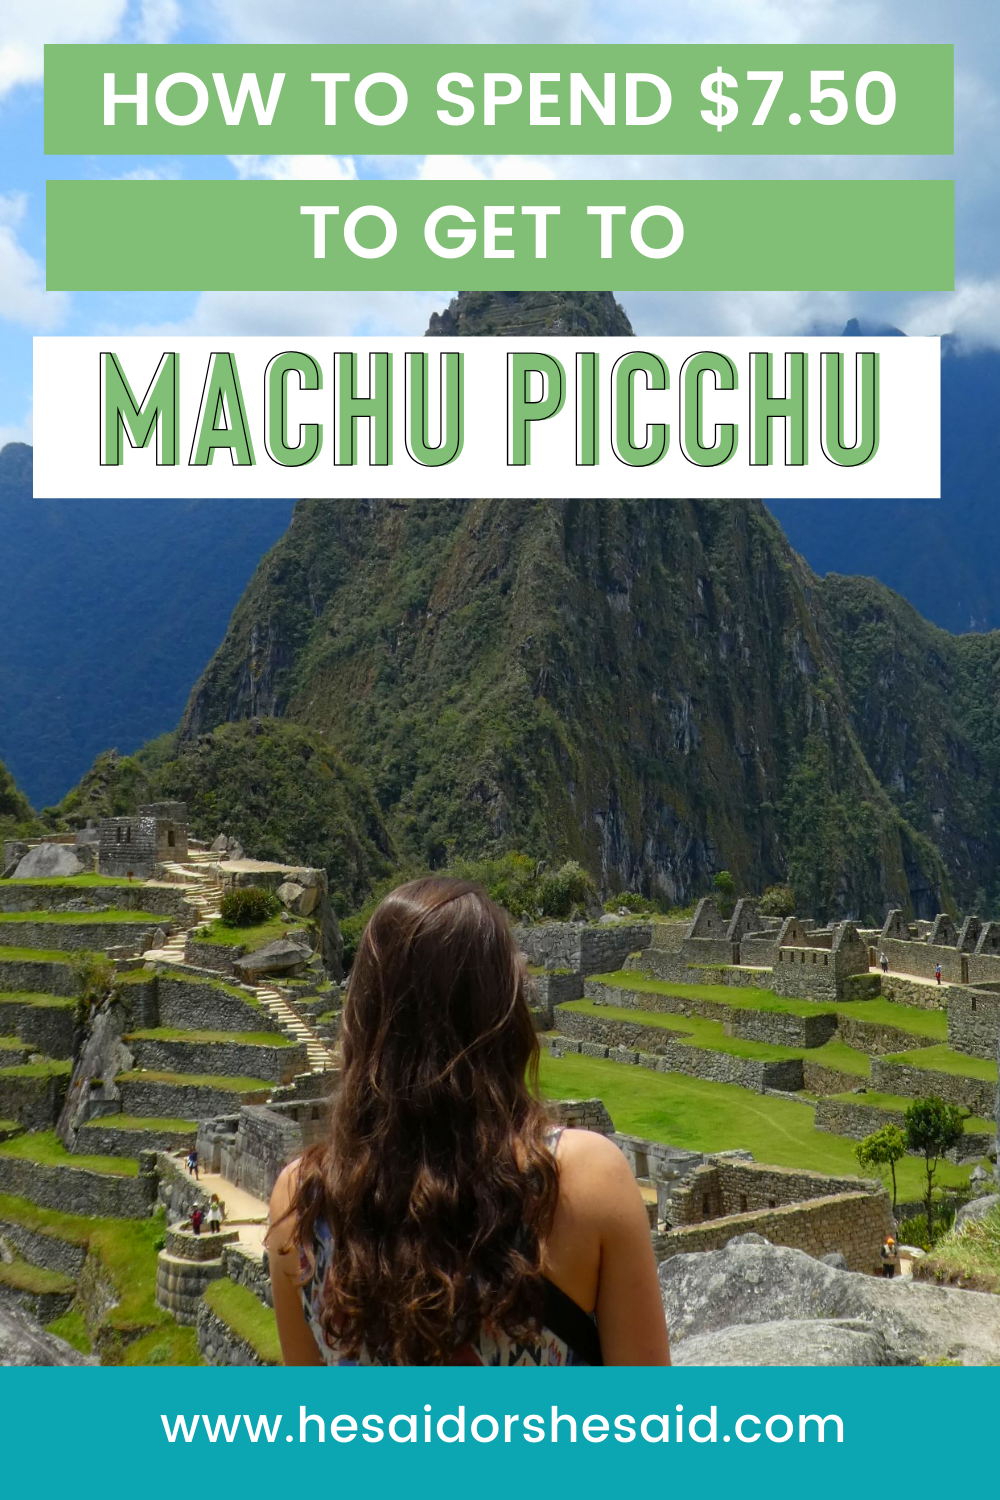 How to spend 7.50 to get to Machu Picchu by hesaidorshesaid